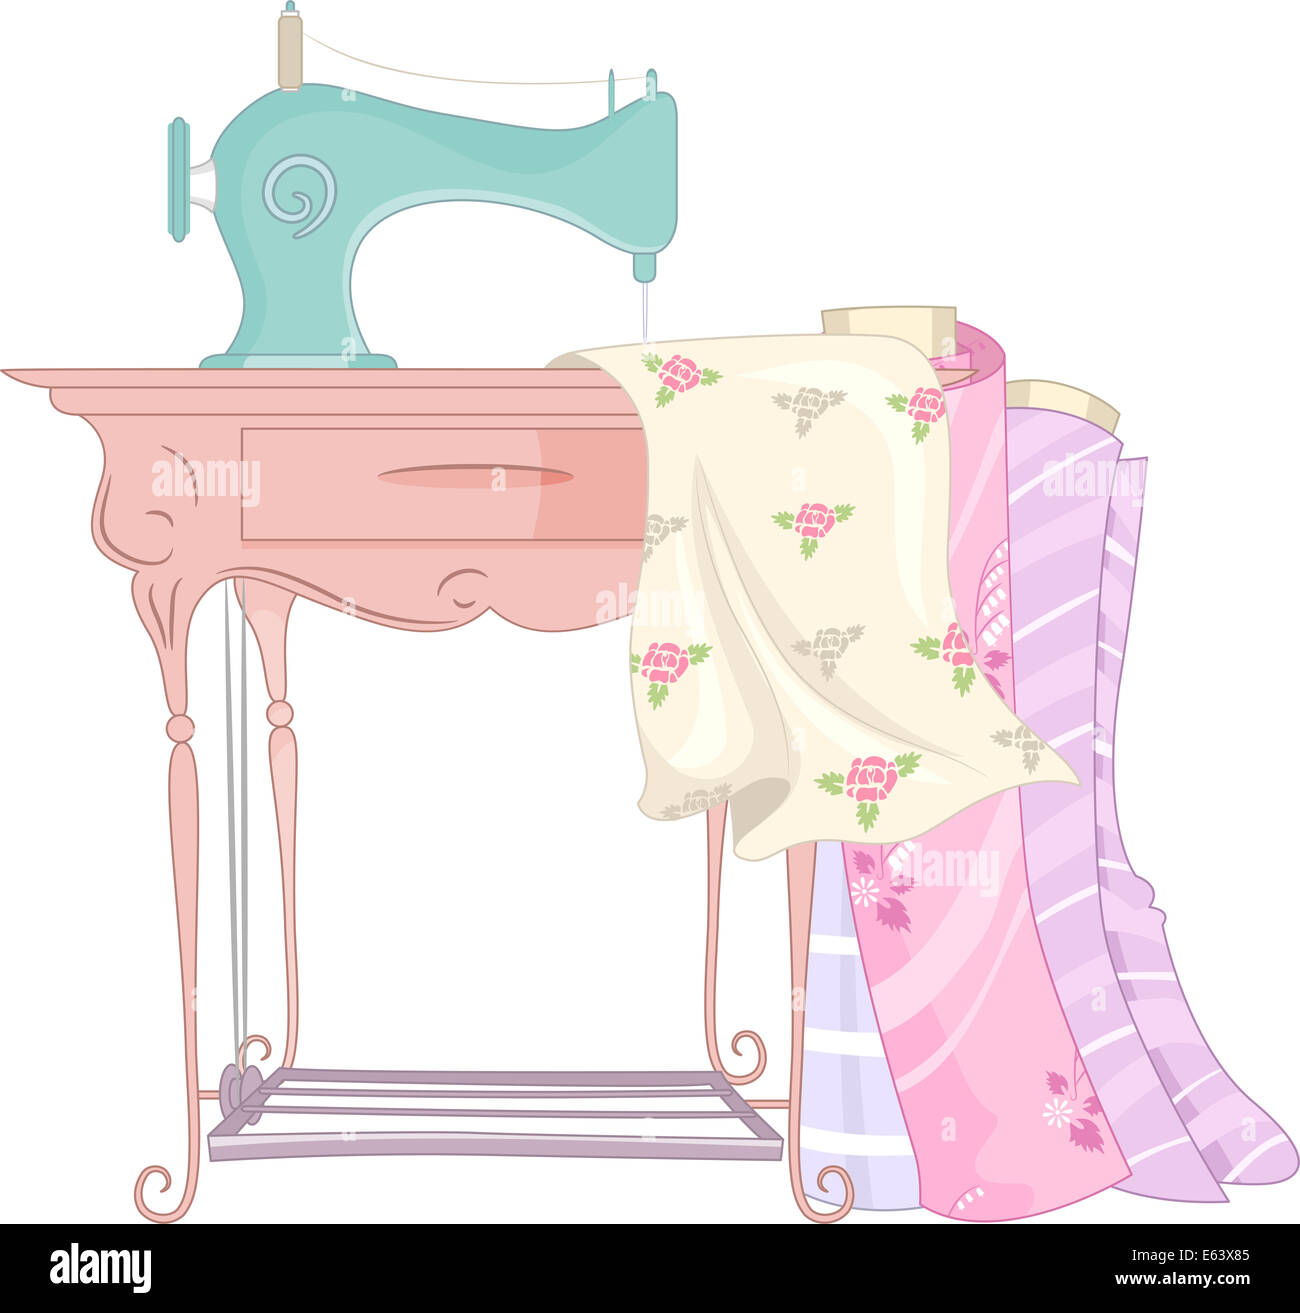 Shabby Chic Illustration Featuring a Treadle Sewing Machine Stock Photo